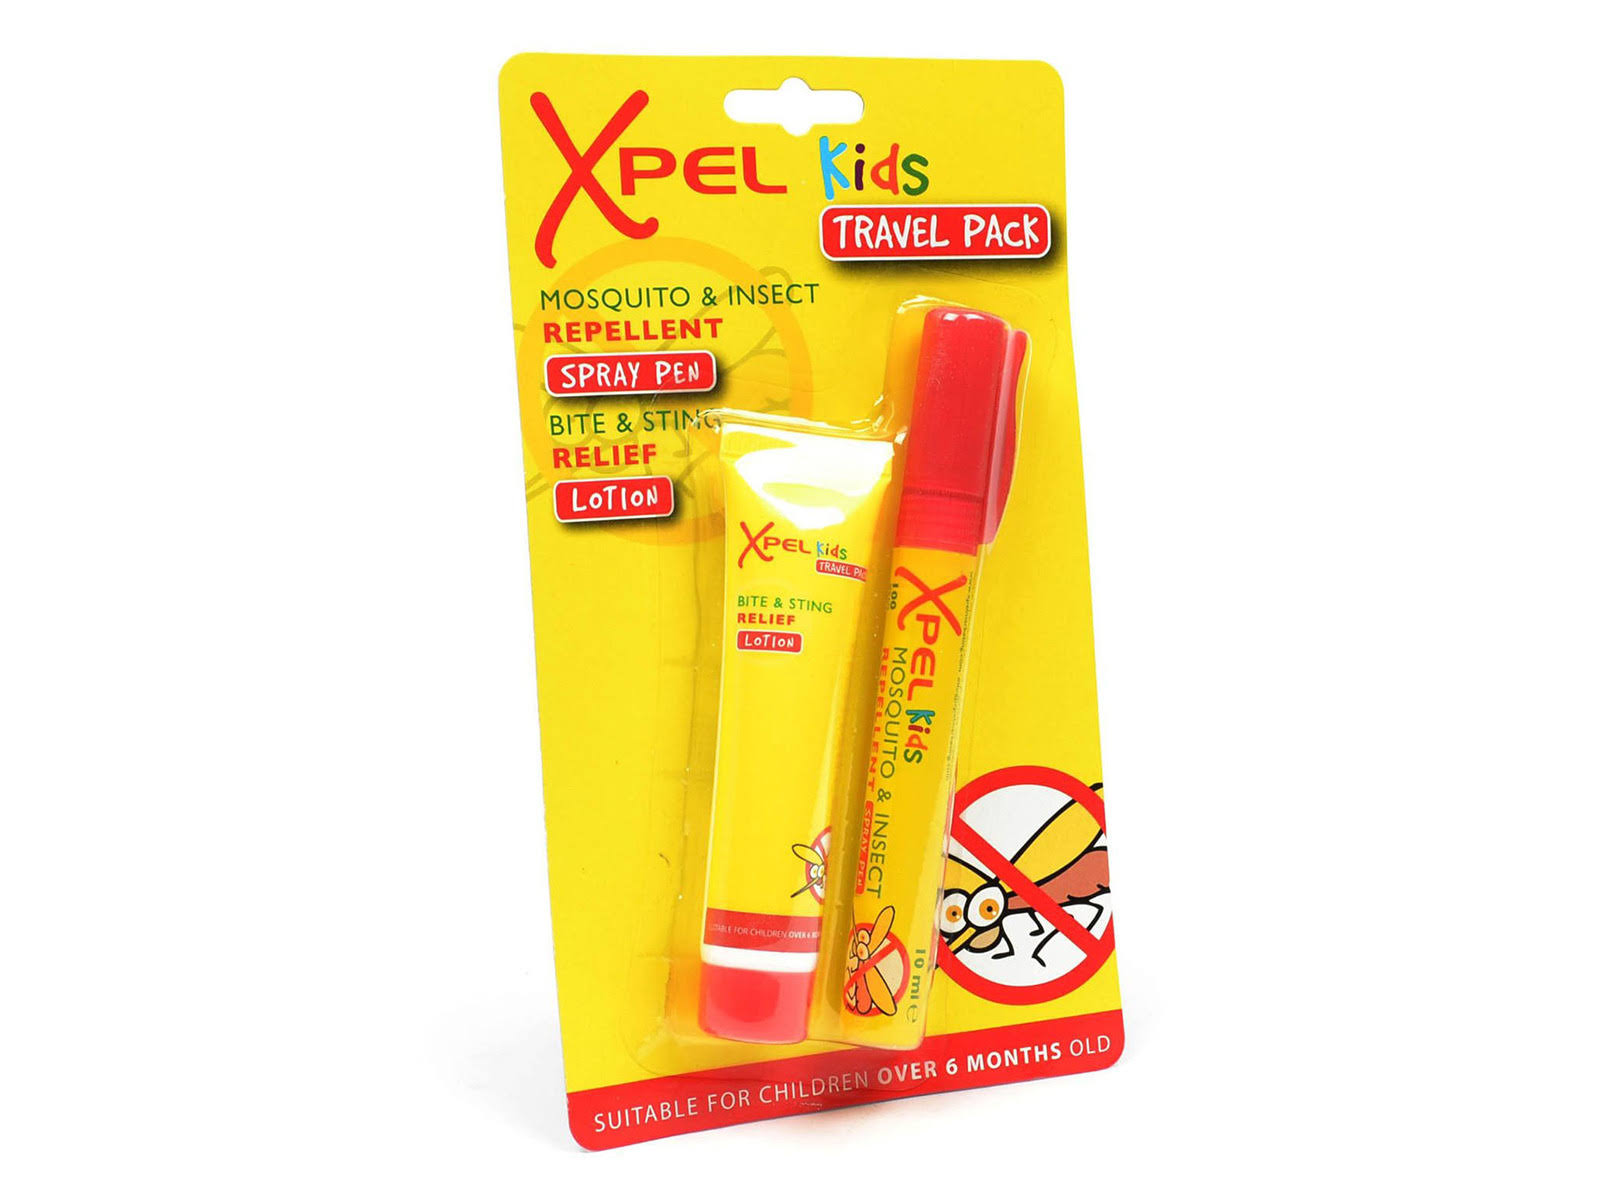 Xpel Kids Mosquito and Insect Repellent Spray Pen and Bite and Sting Relief Lotion